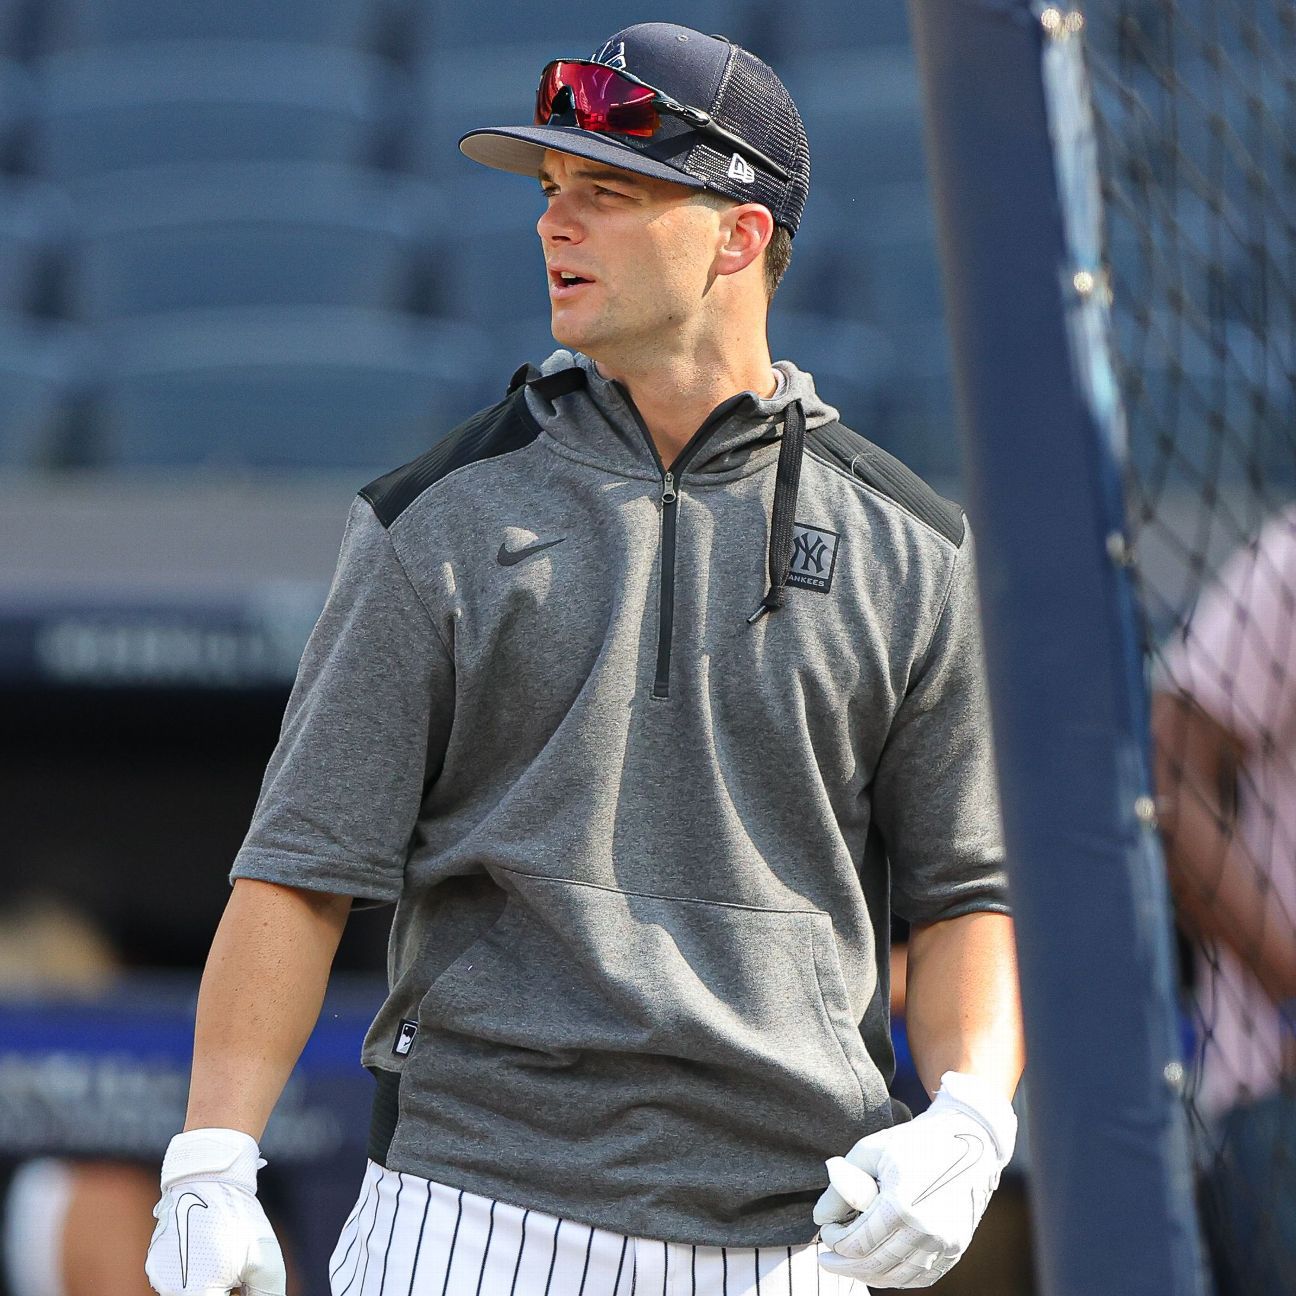 Benintendi excited to get started with Yankees